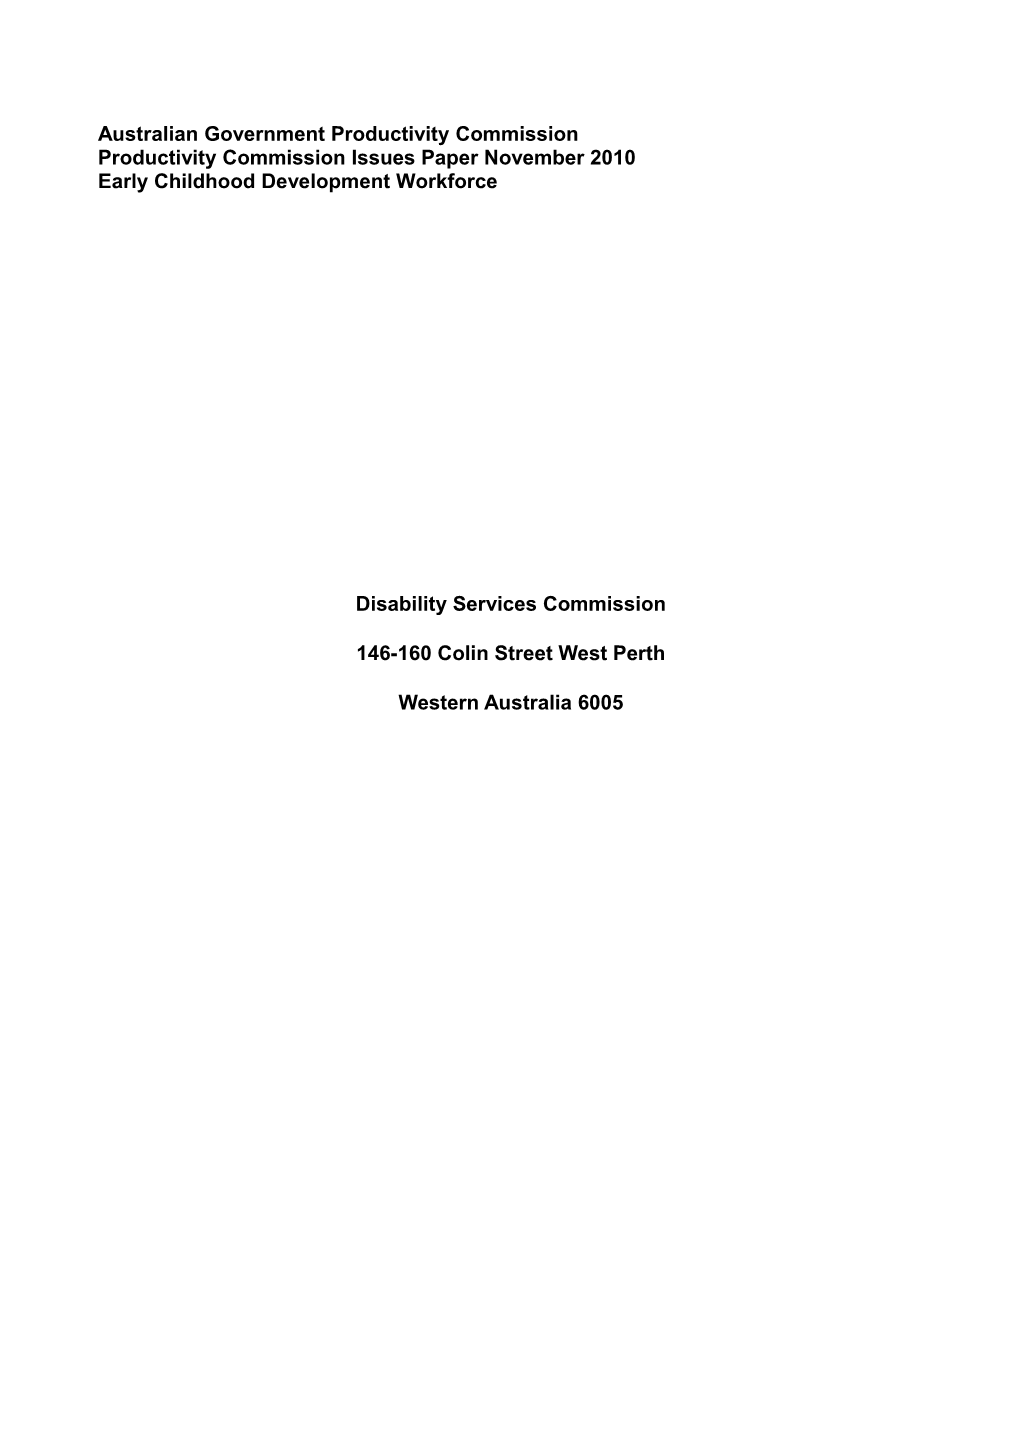 Submission 76 - Disability Services Commission WA - Caring for Older Australians - Public